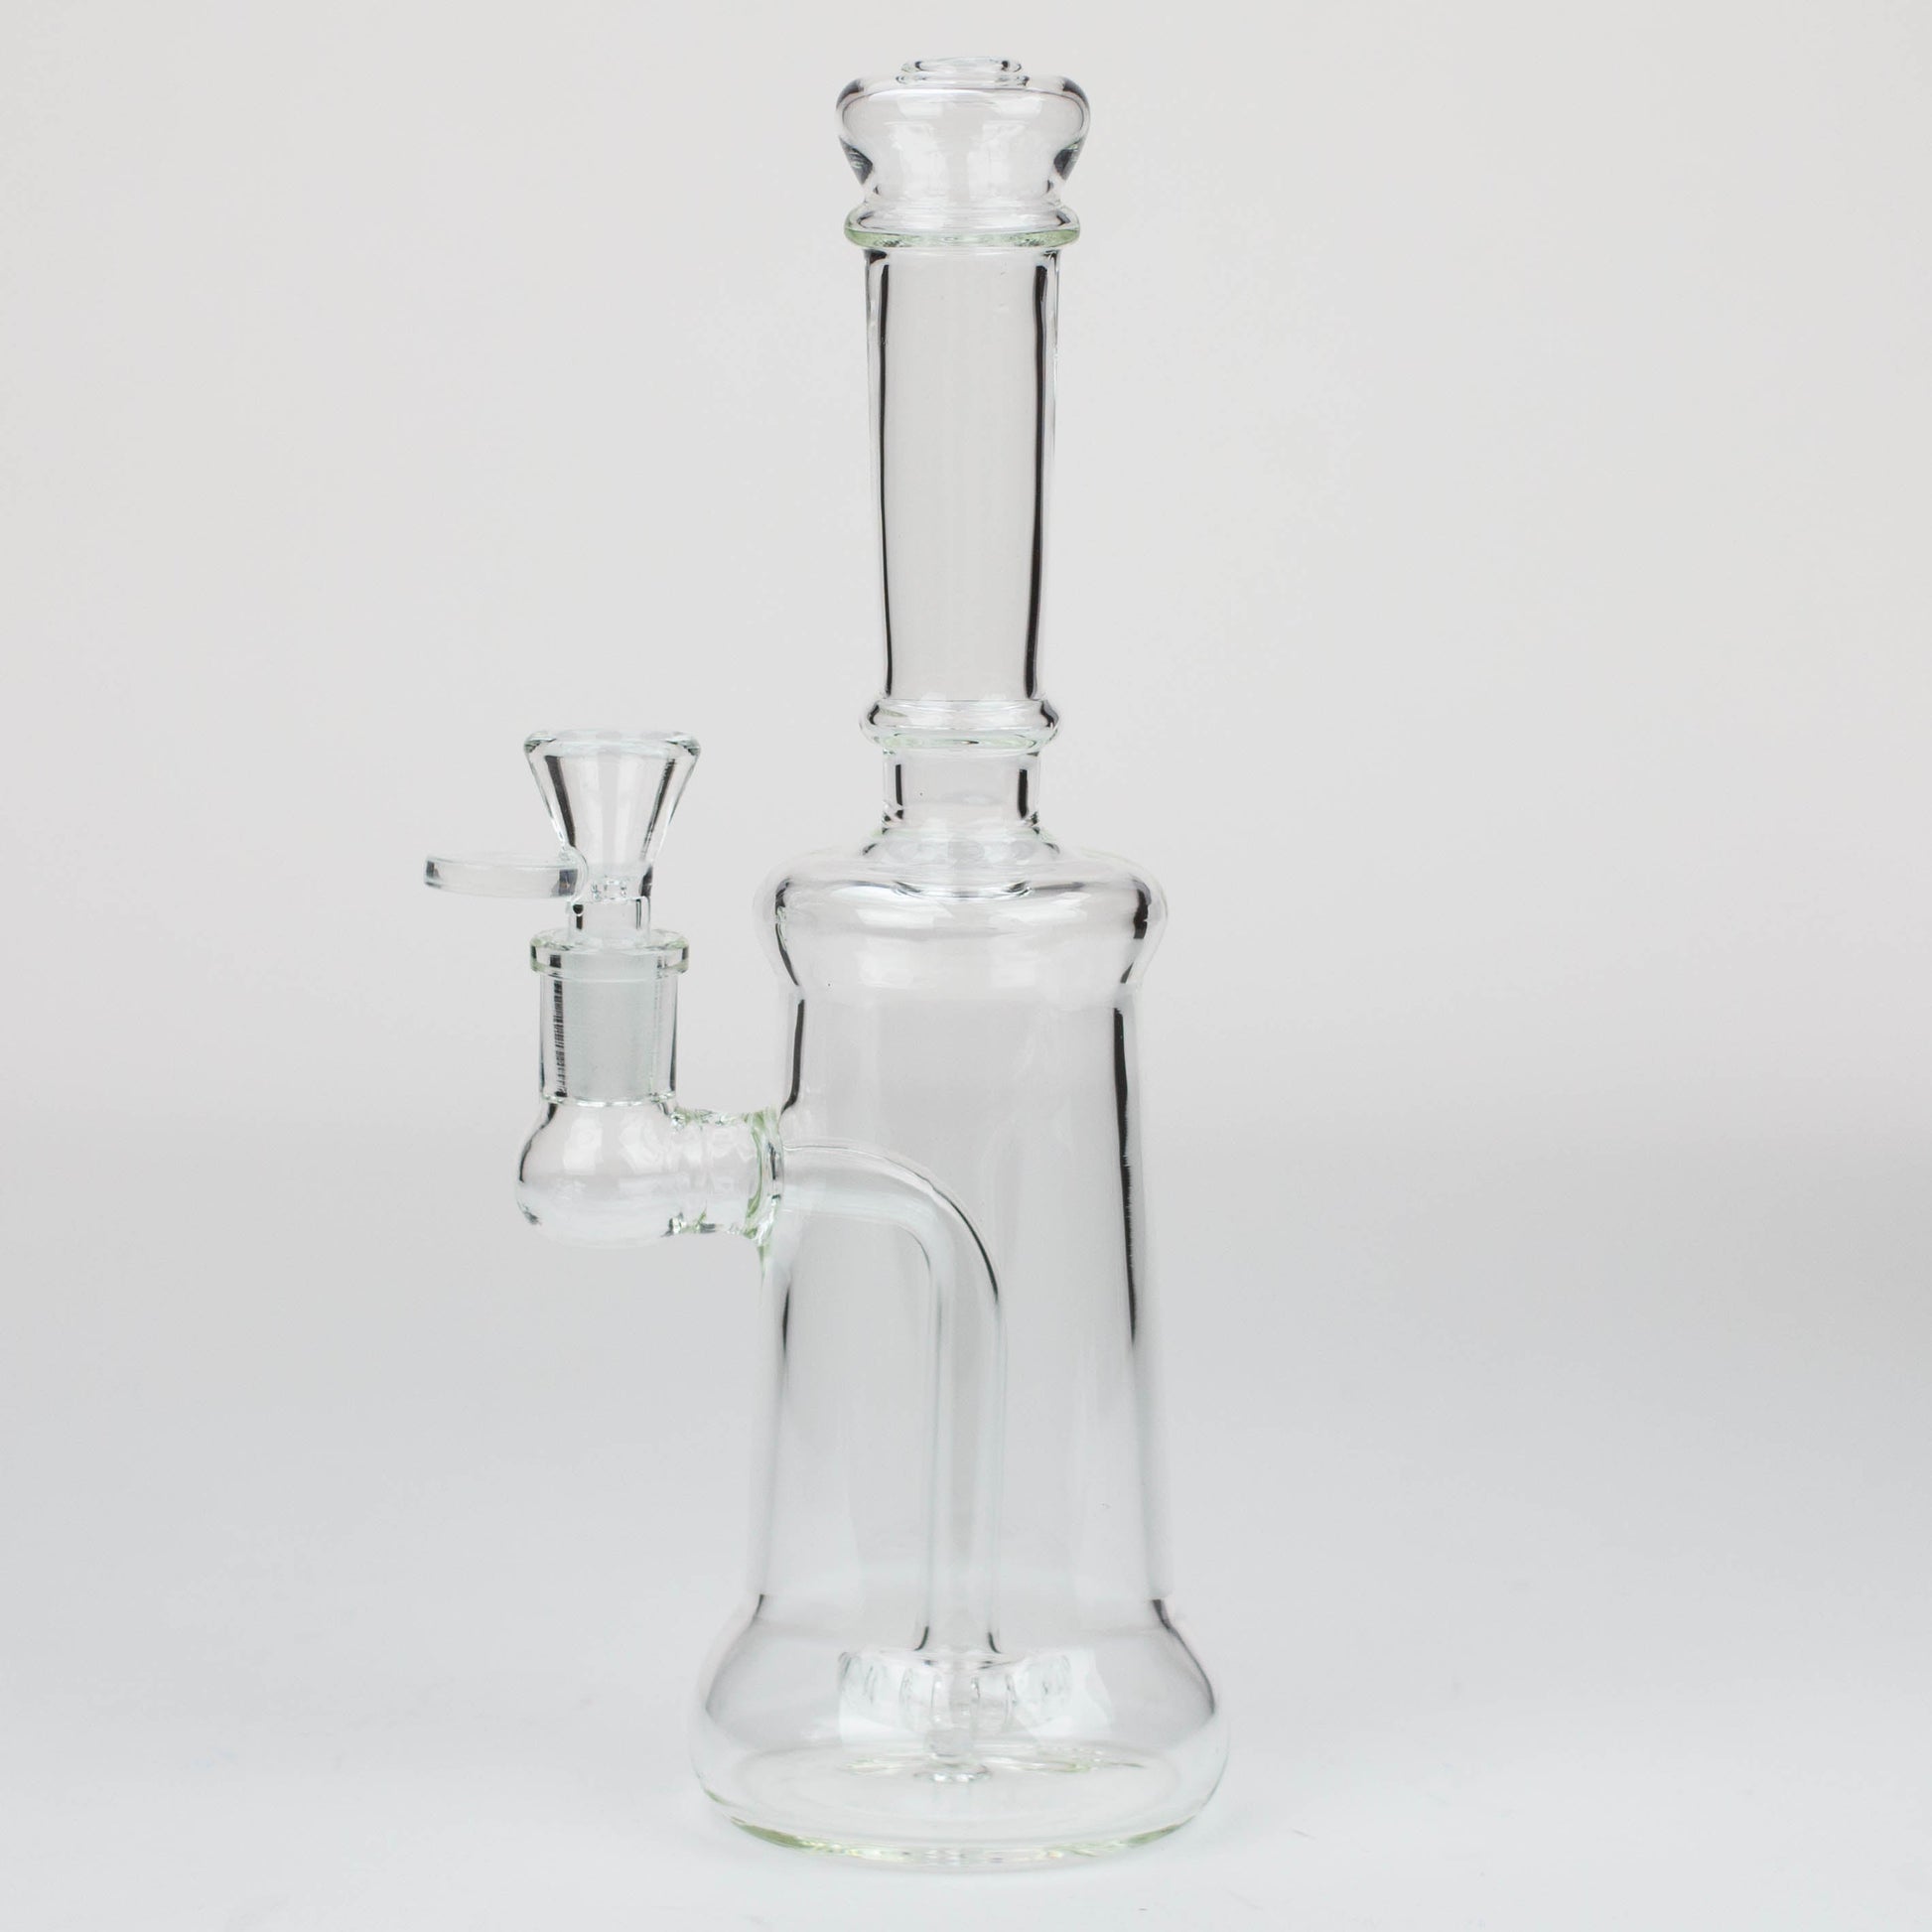 
Quality Borosilicate Glass
10" Height
Base : 4
Bowls for a 14 mm female Joint
Showerhead diffuser
Stemless
10" showerhead diffuser glass bong [SP54]Bongsempire420